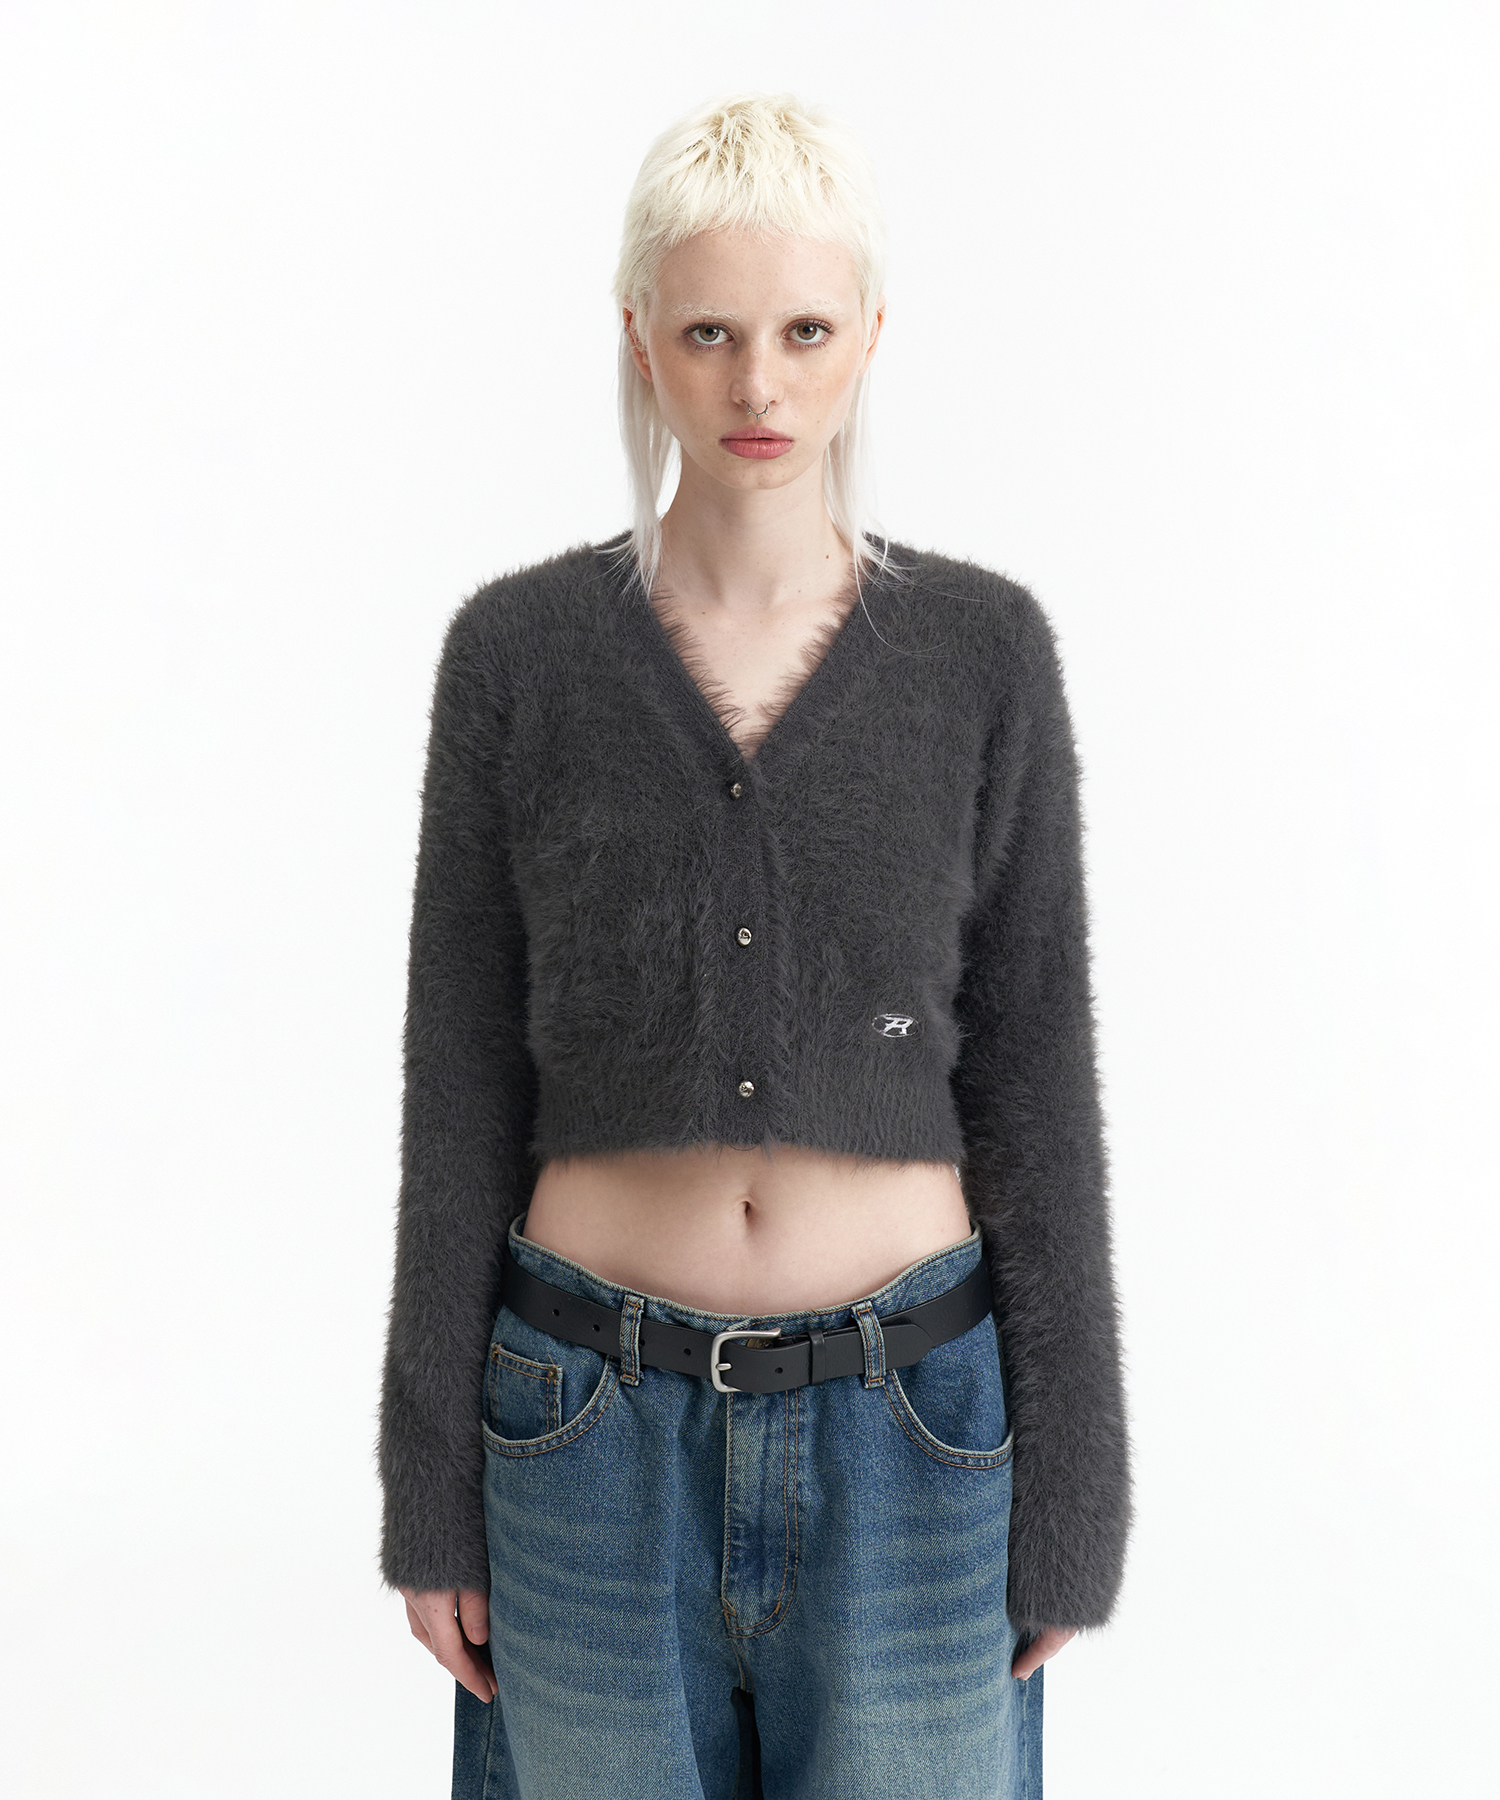 Nickel Button Mohair Cardigan - Charcoal